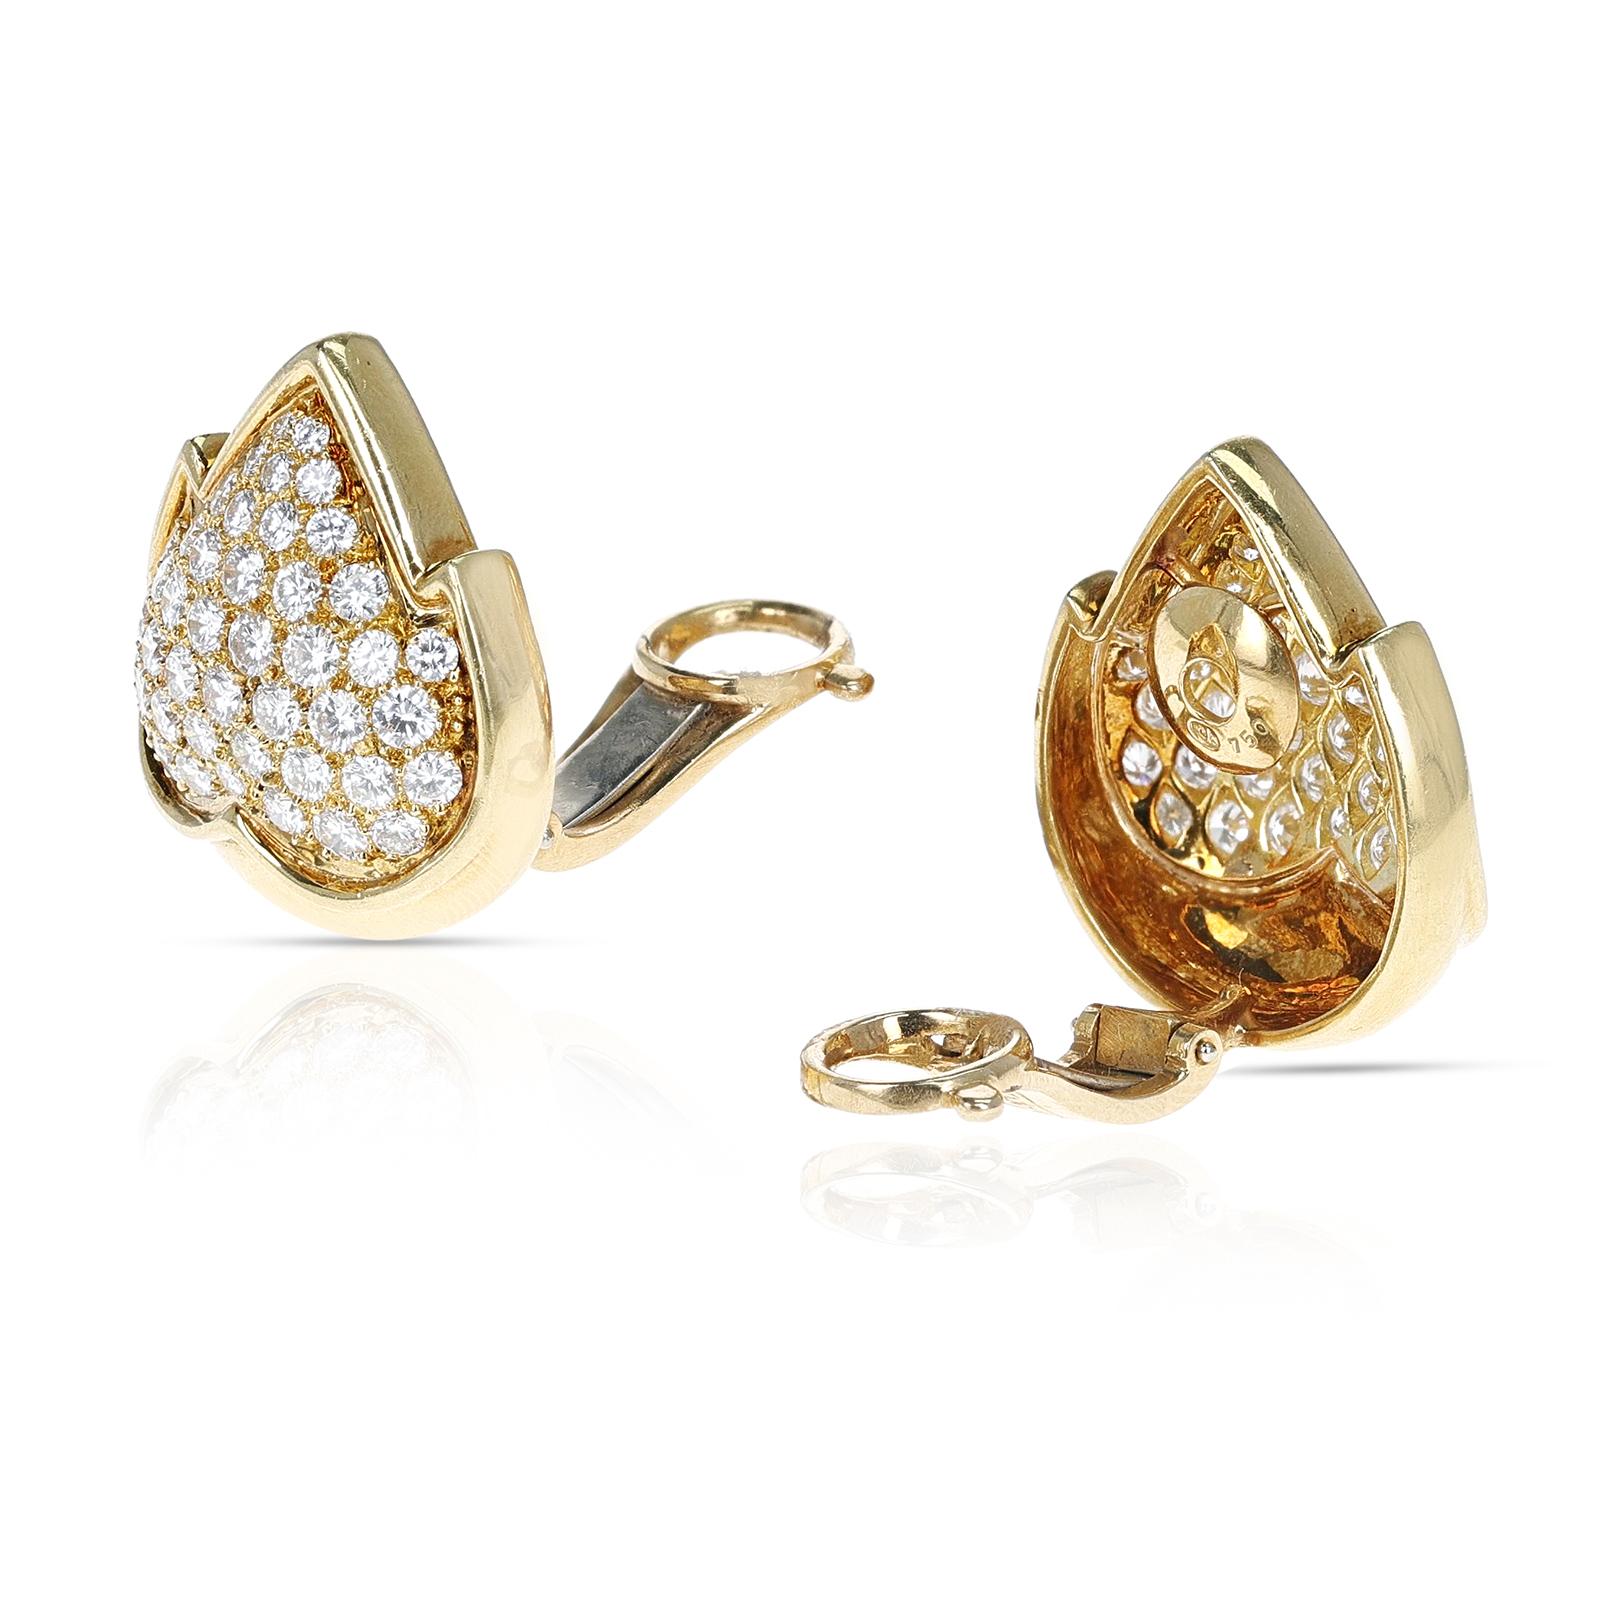 A bold pair of Van Cleef & Arpels Leaf Earrings with 5 cts. Diamonds made in 18 Karat Yellow Gold. The length is 1 inch. The total weigh tis 21.95 grams. 